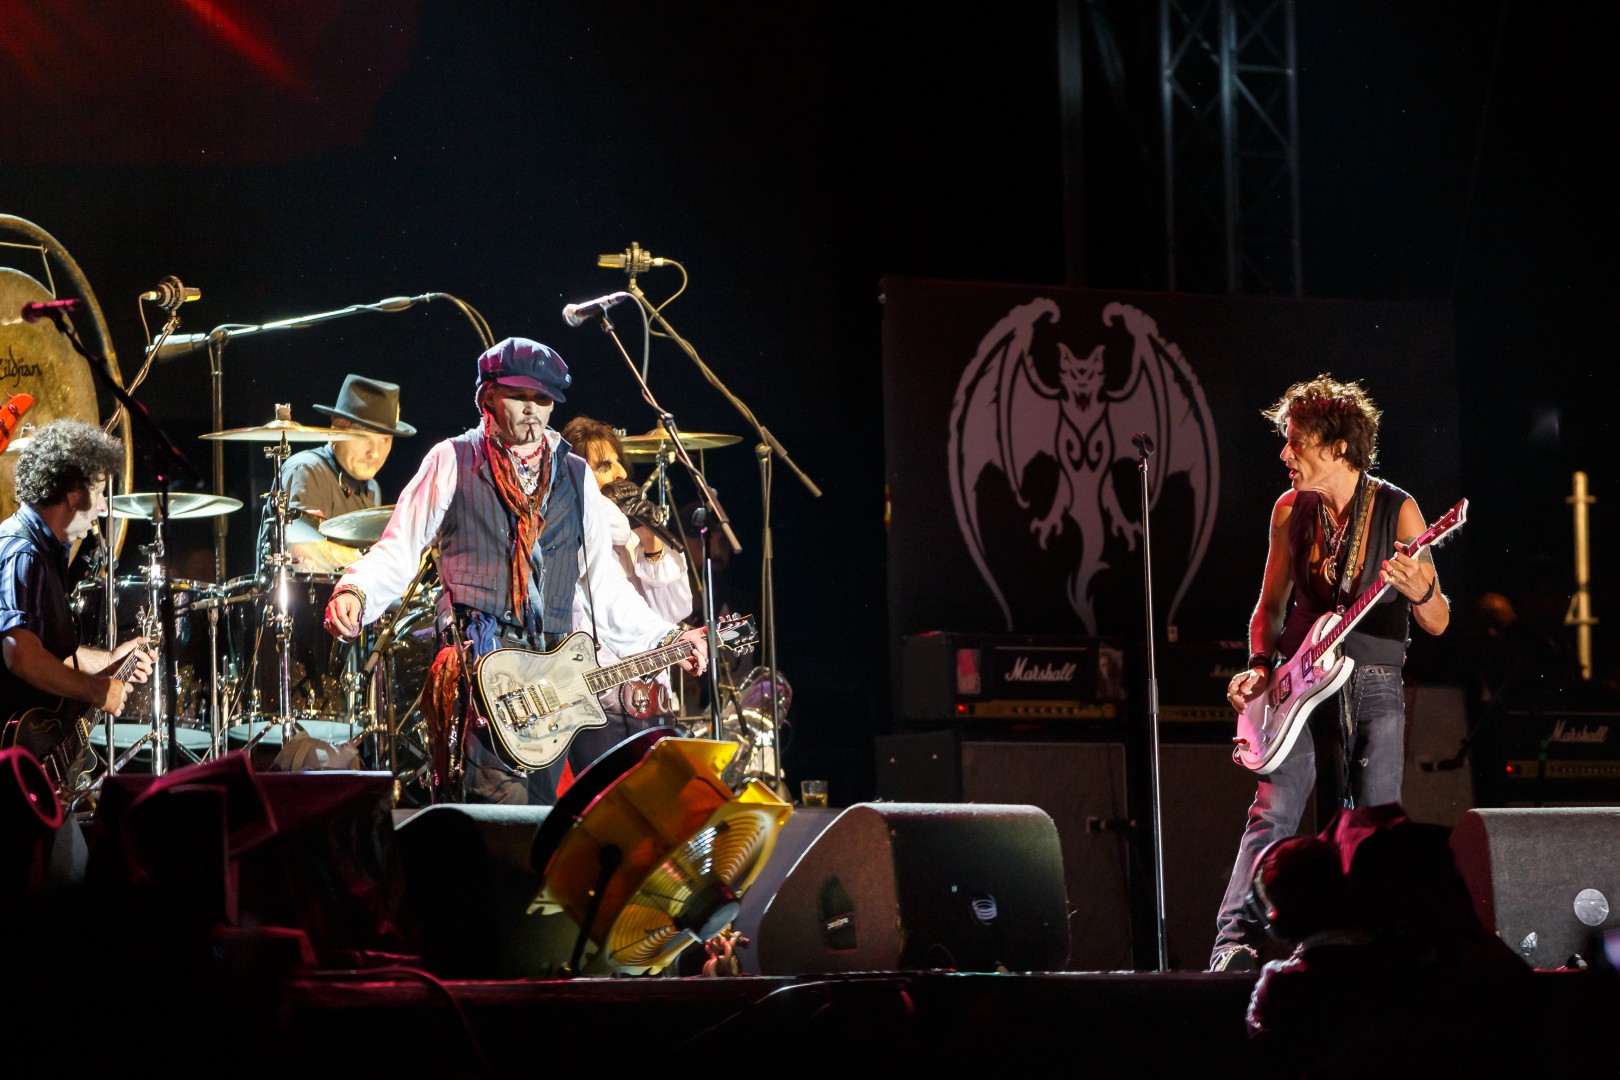 Hollywood Vampires at Romexpo in Bucharest on June 6, 2016 (181f72ad66)